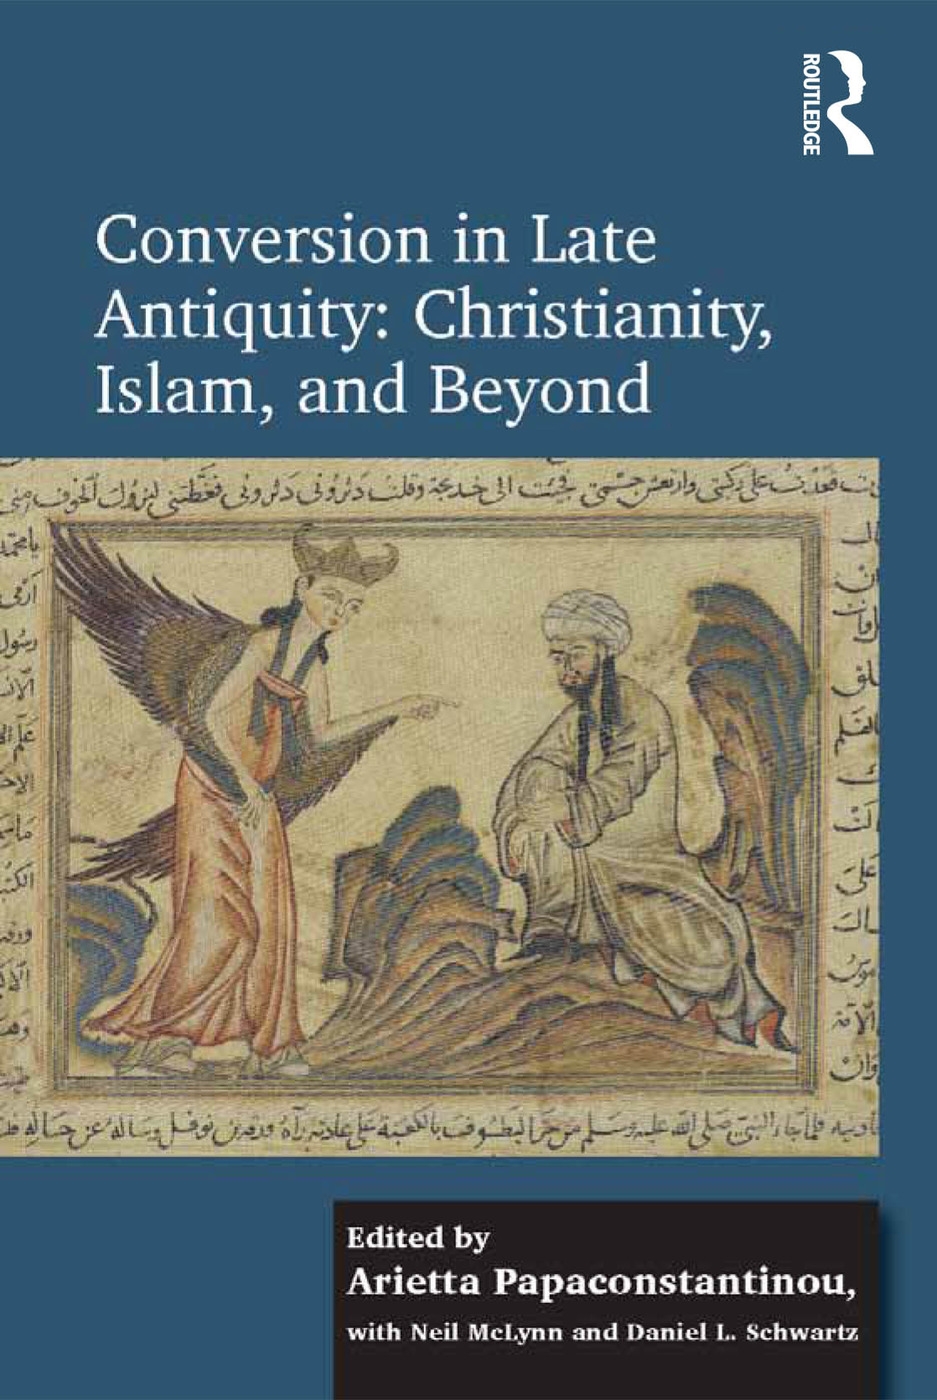 Conversion in Late Antiquity: Christianity, Islam, and Beyond: Papers from the Andrew W. Mellon Foundation Sawyer Seminar, University of Oxford, 2009-